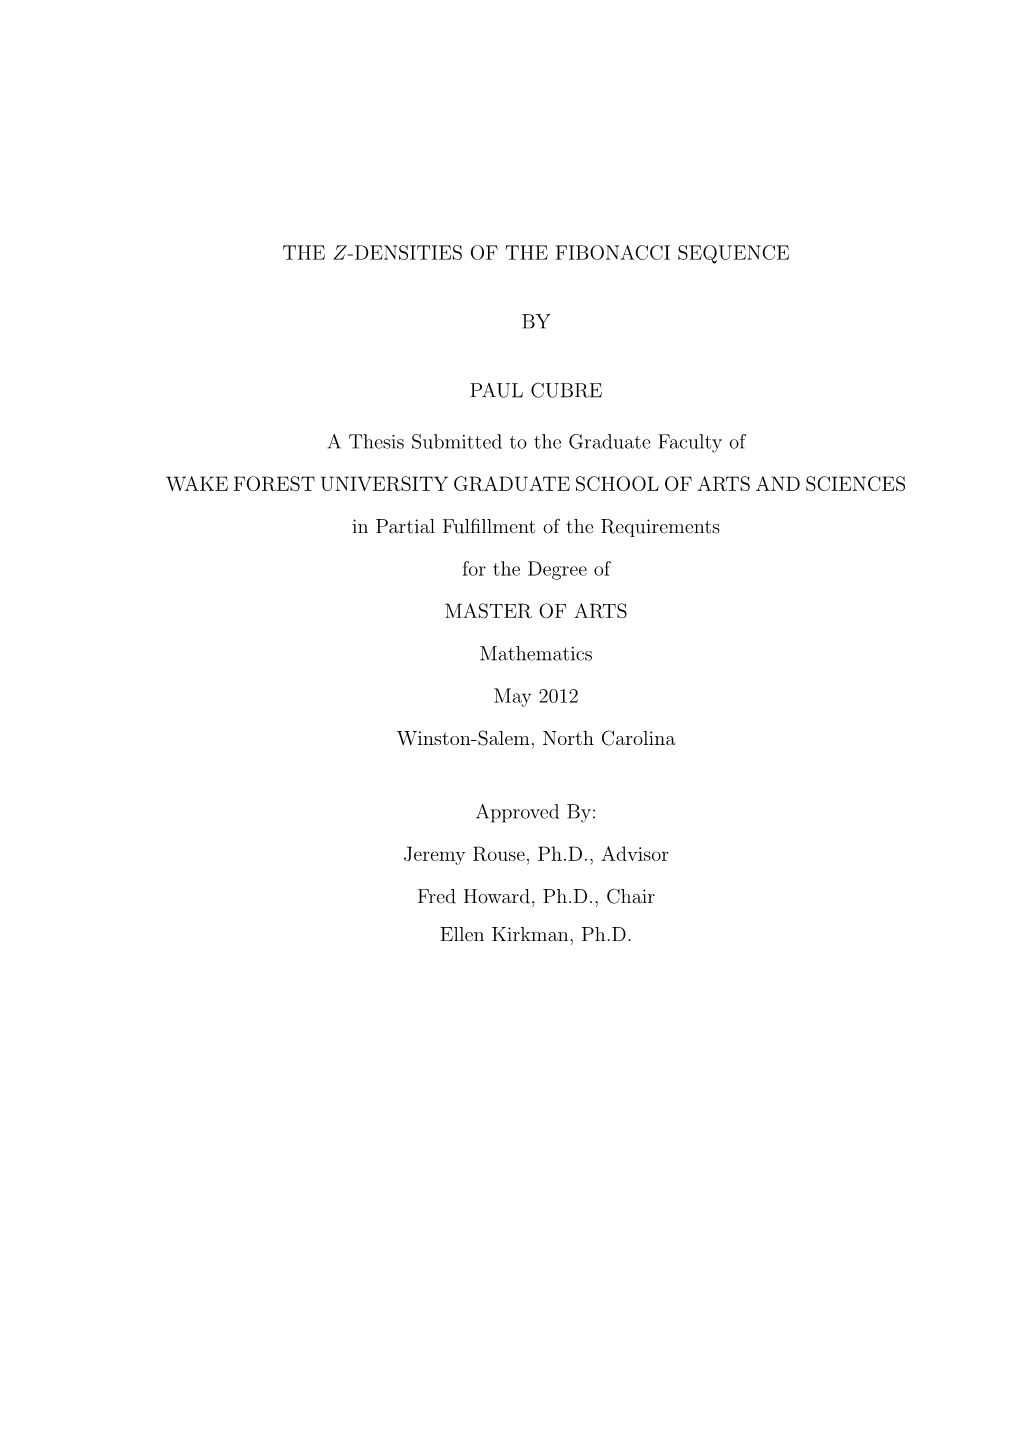 THE Z-DENSITIES of the FIBONACCI SEQUENCE by PAUL CUBRE a Thesis Submitted to the Graduate Faculty of WAKE FOREST UNIVERSITY